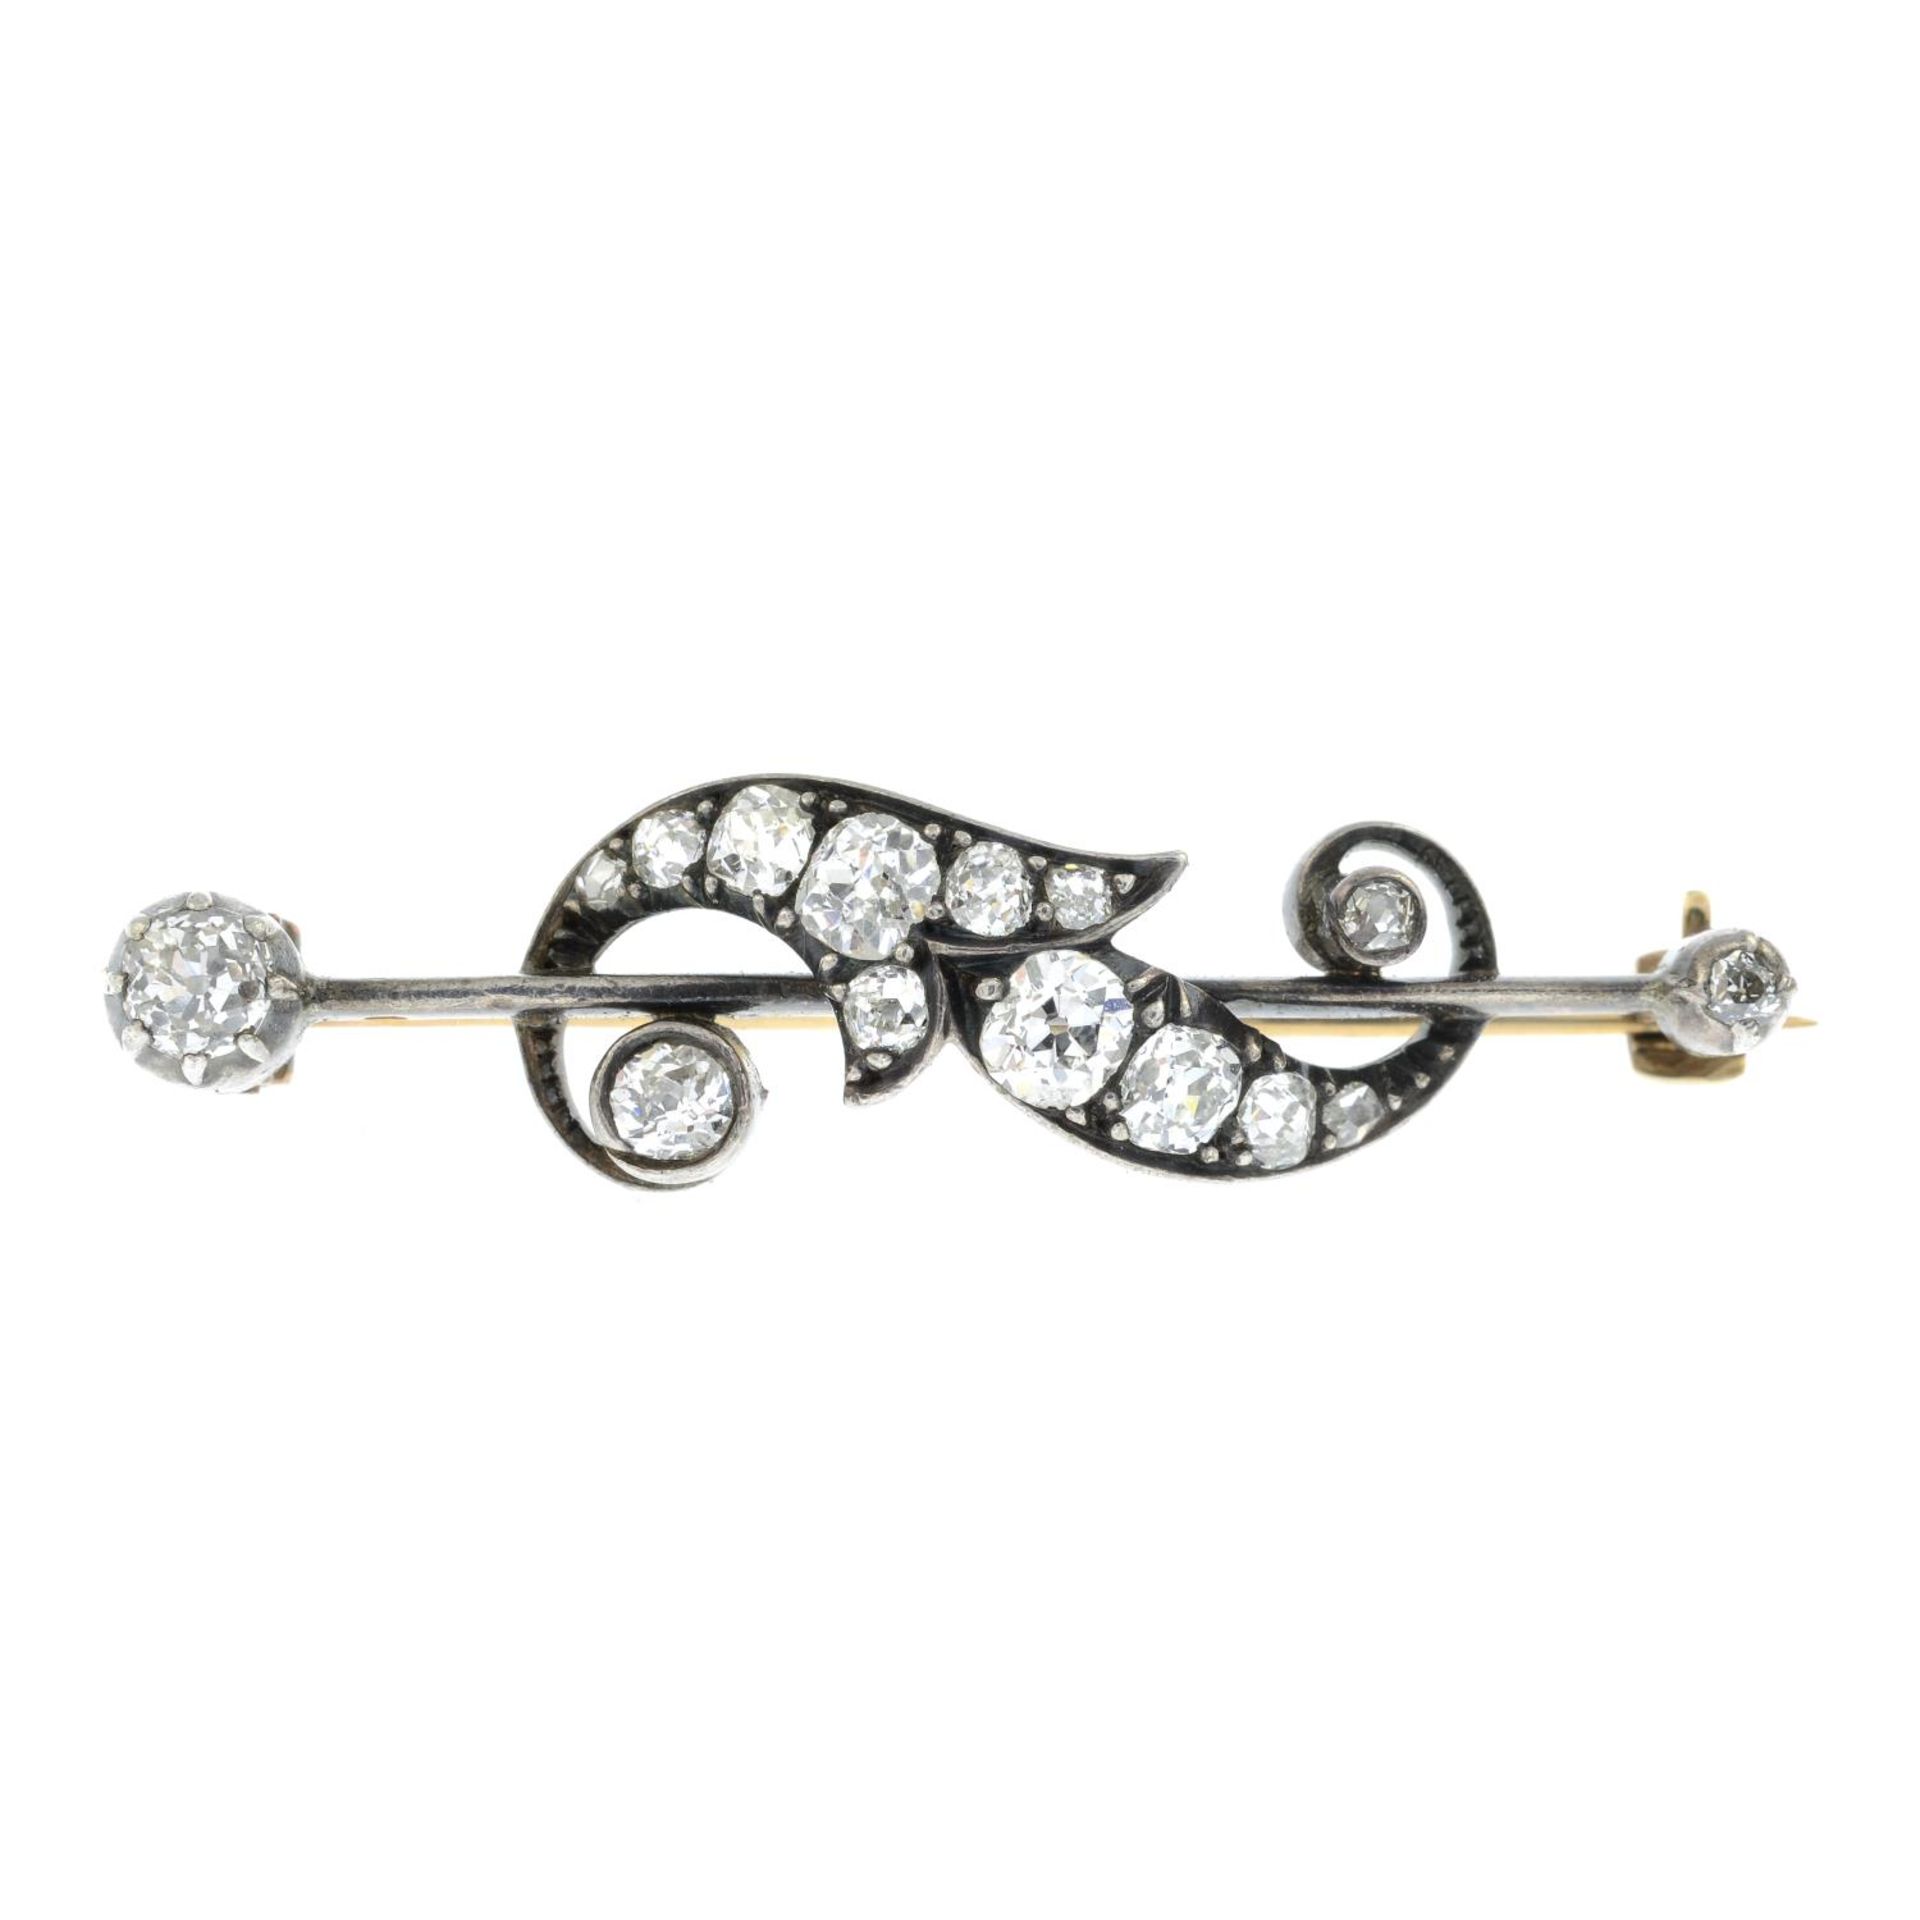 An Art Nouveau 9ct gold and silver old-cut diamond bar brooch.Estimated total diamond weight 1ct,